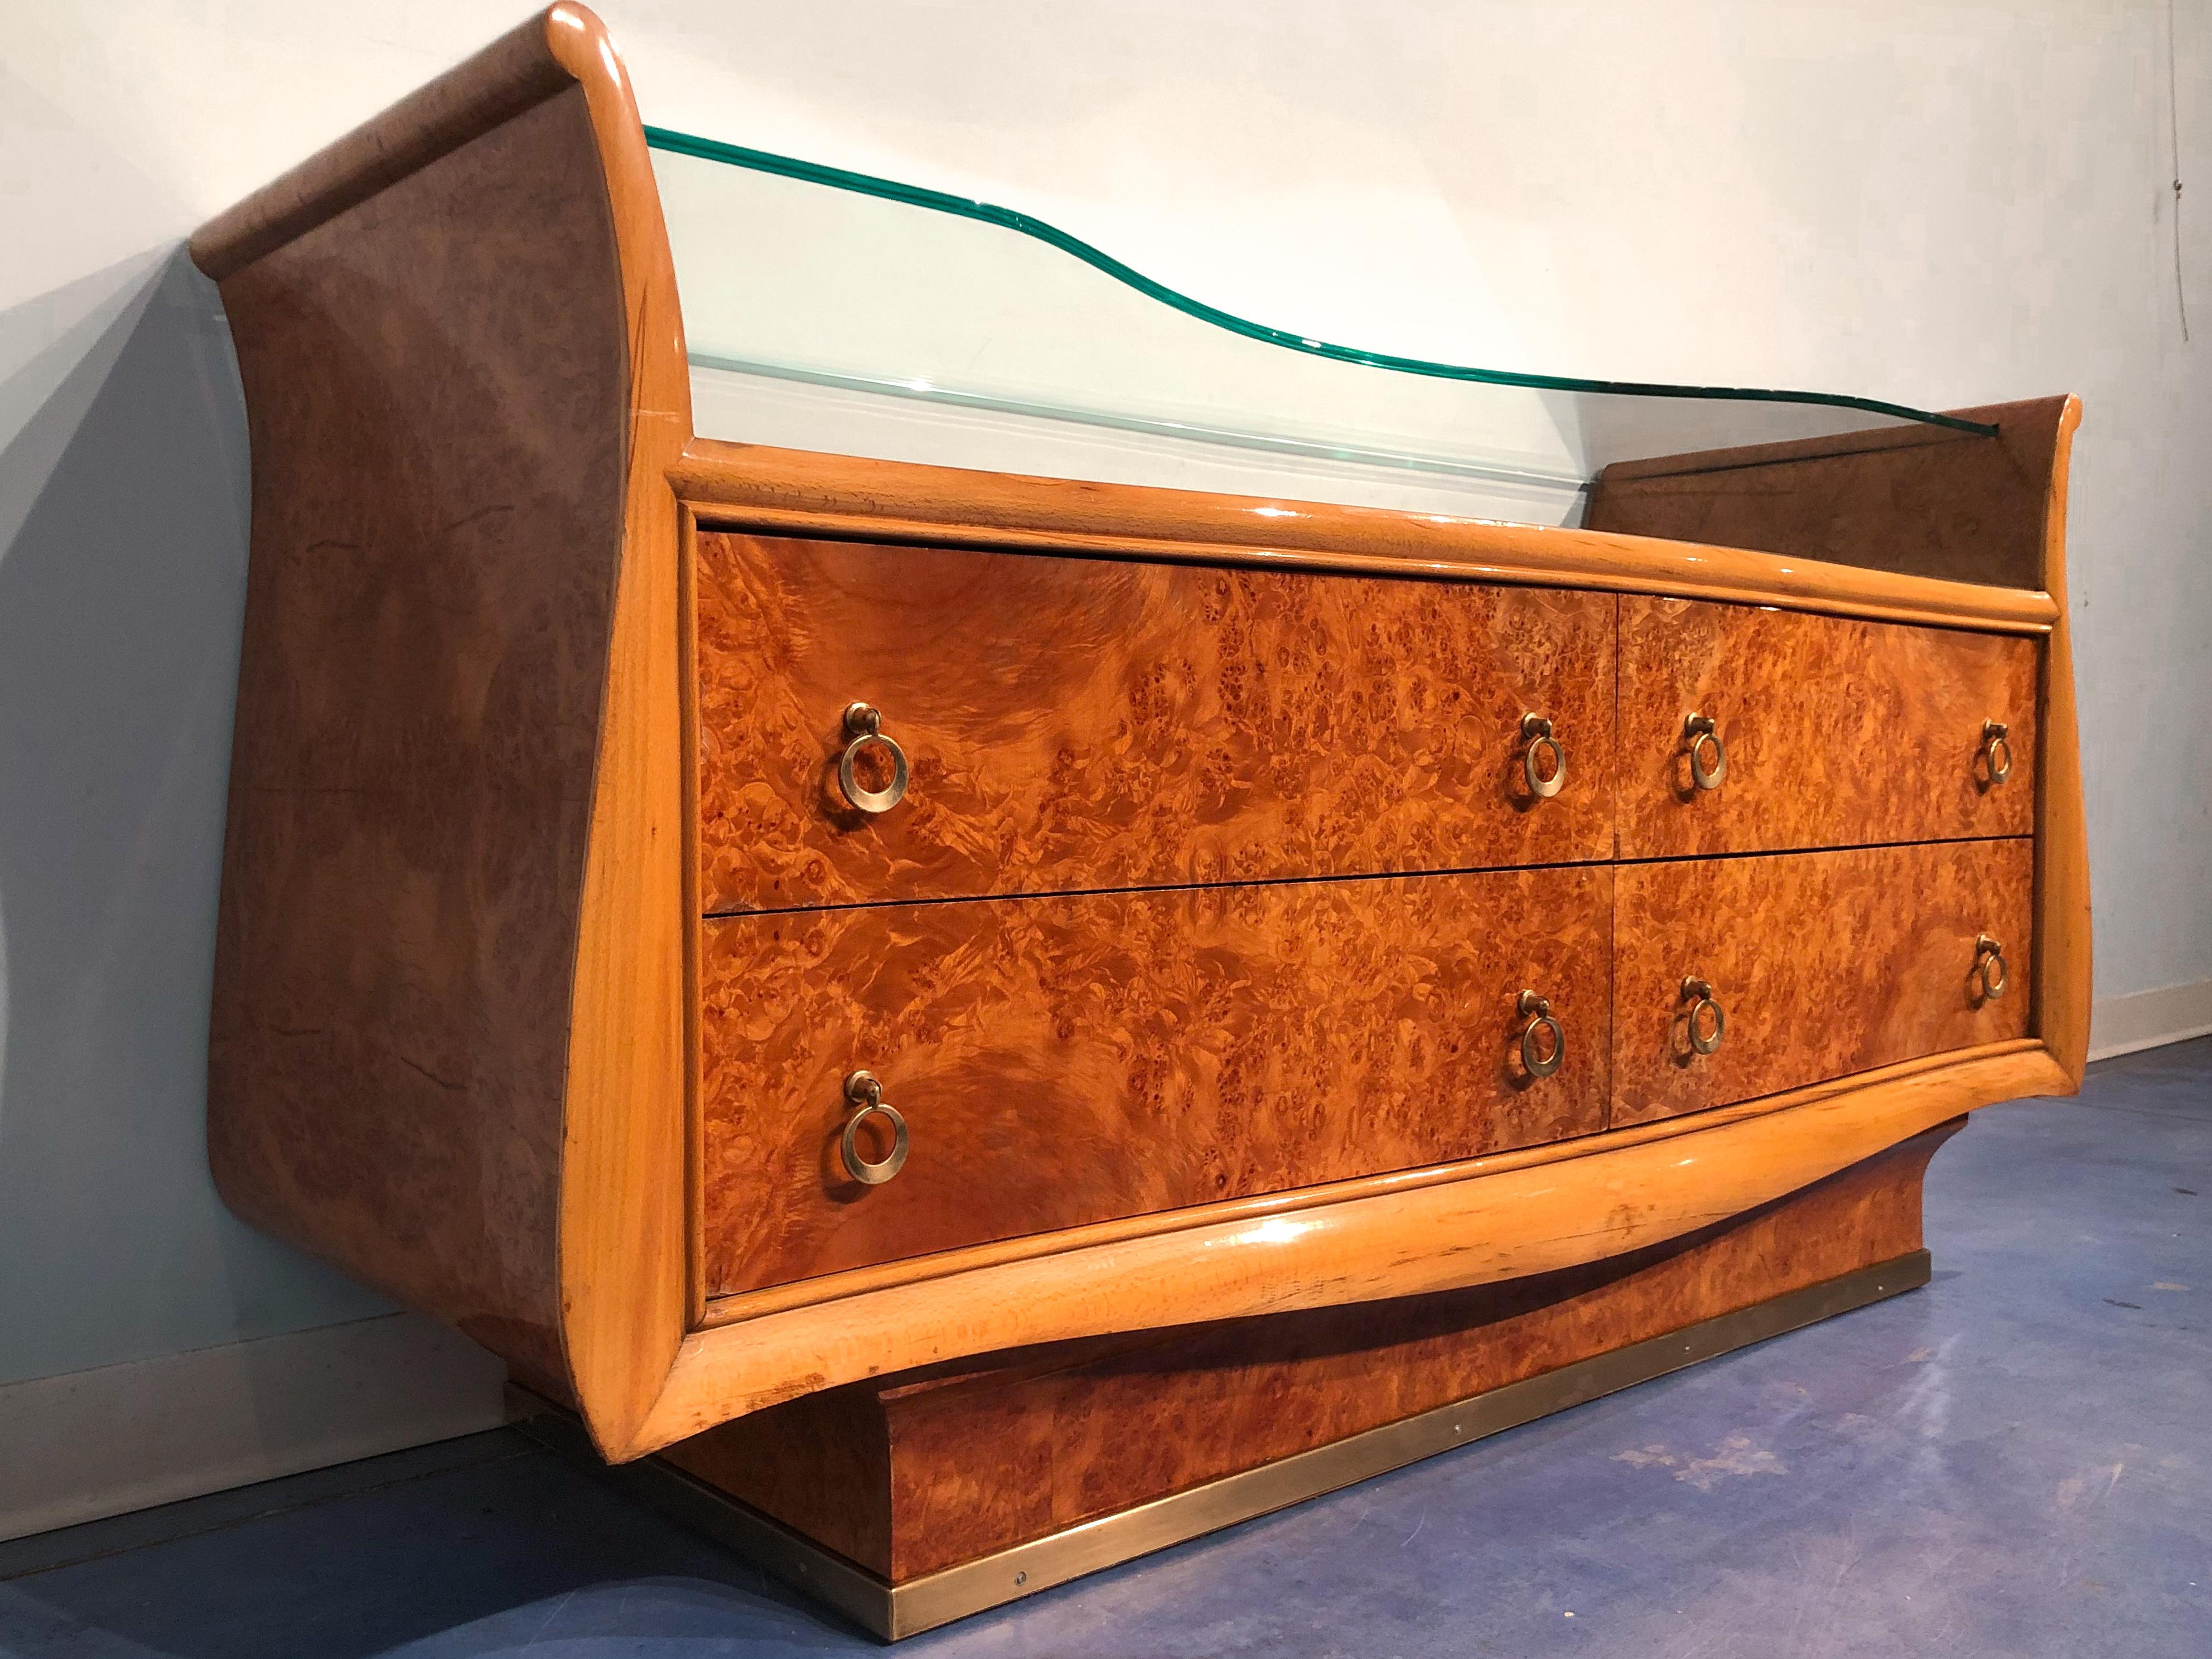 Italian Mid-Century Modern Chest of Drawers in Birch Briar Root, 1950s For Sale 10